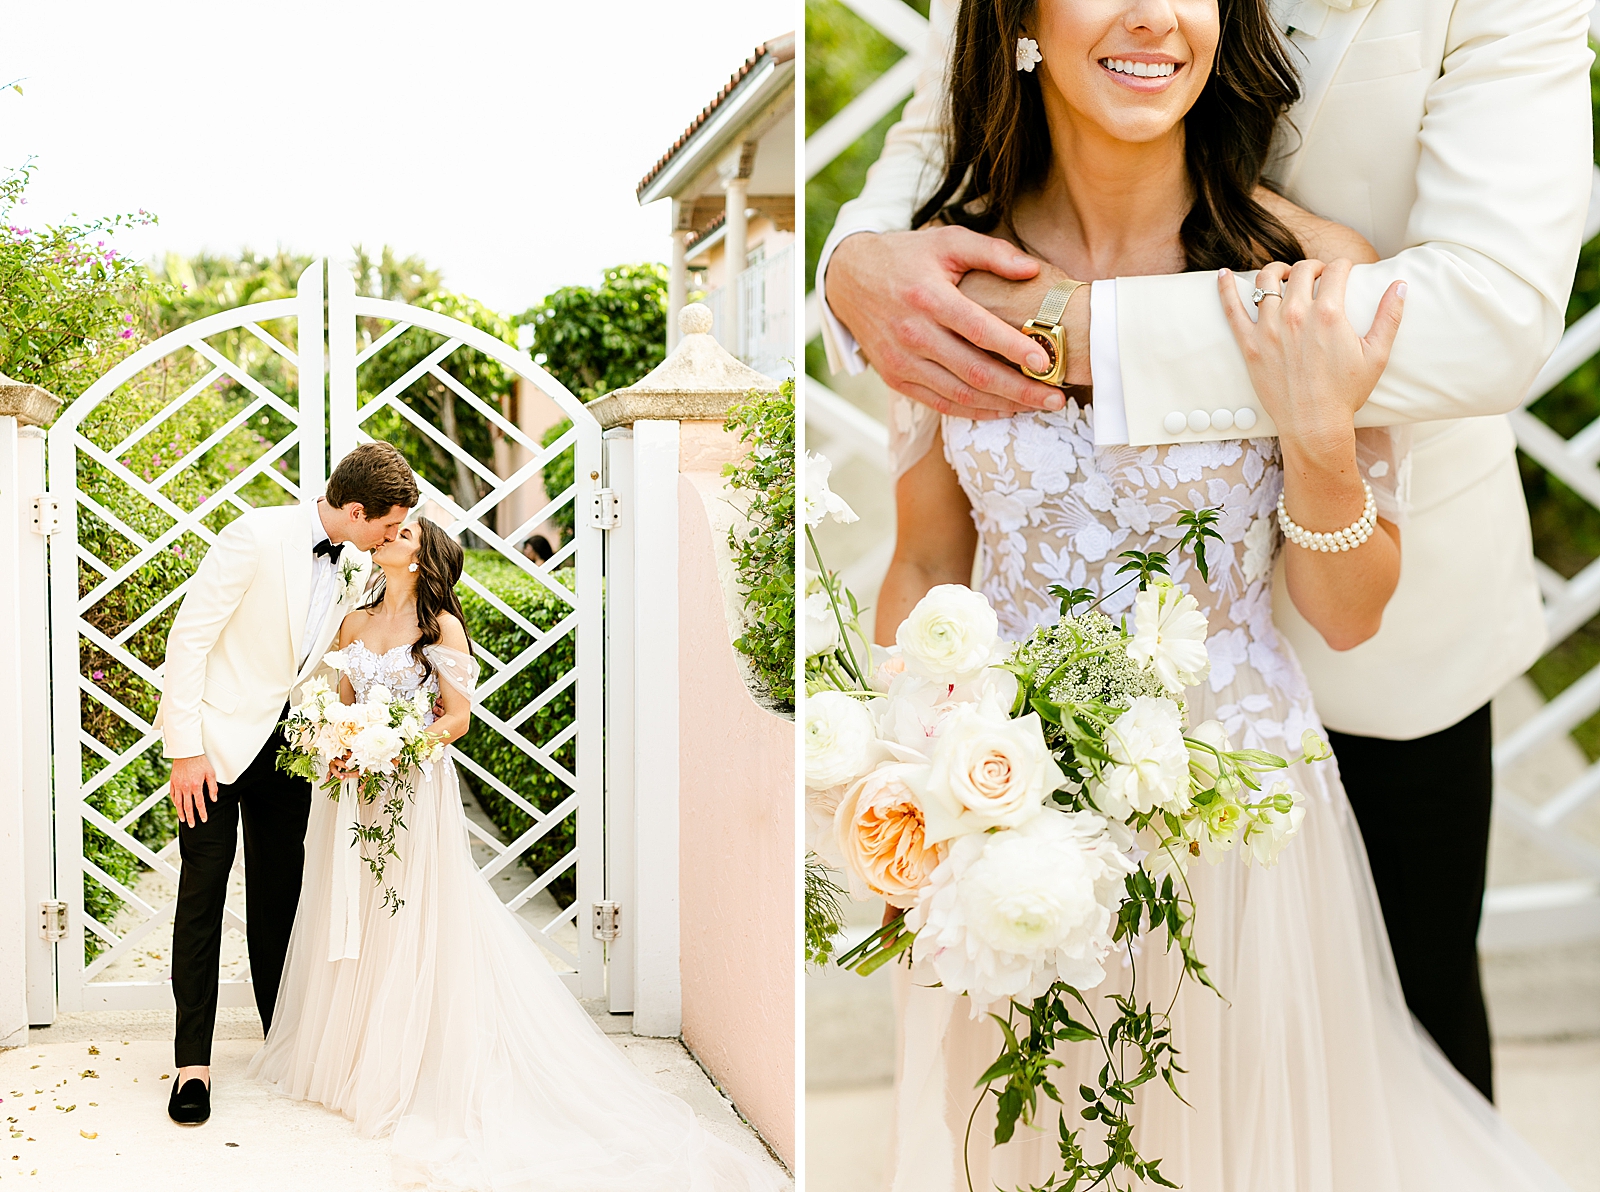 Bride and Groom kissing in front of white gate and Groom holding Bride holding light bouquet